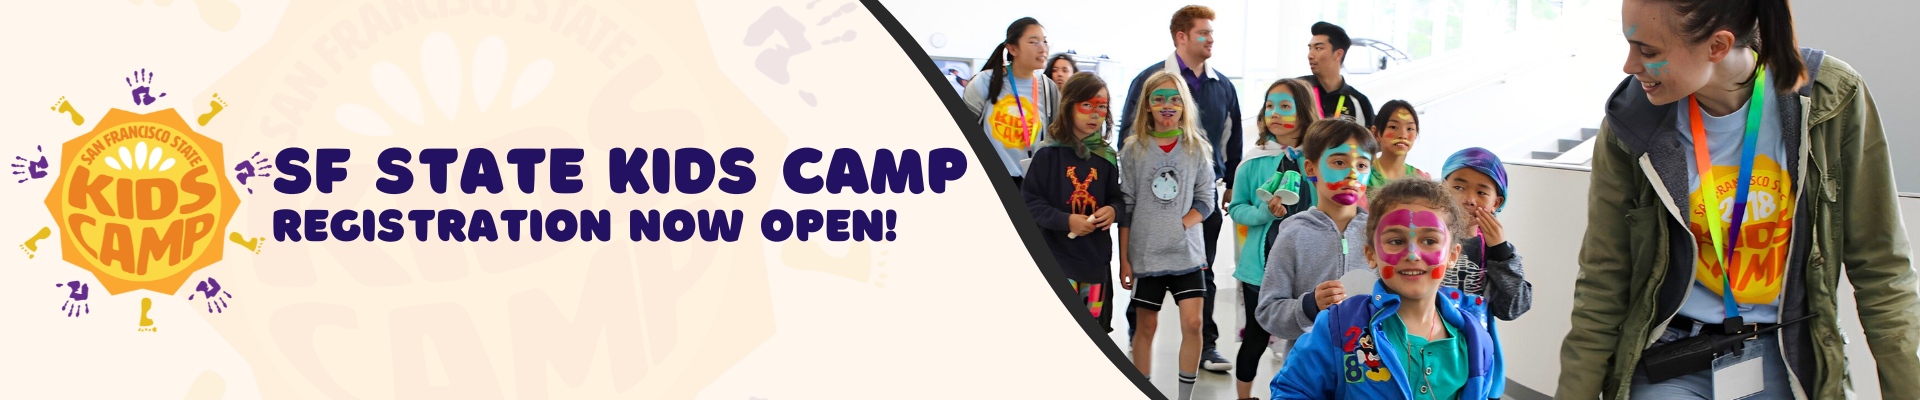 SF State Kids Camp registration is now open! Kids attending summer camp smiling. 